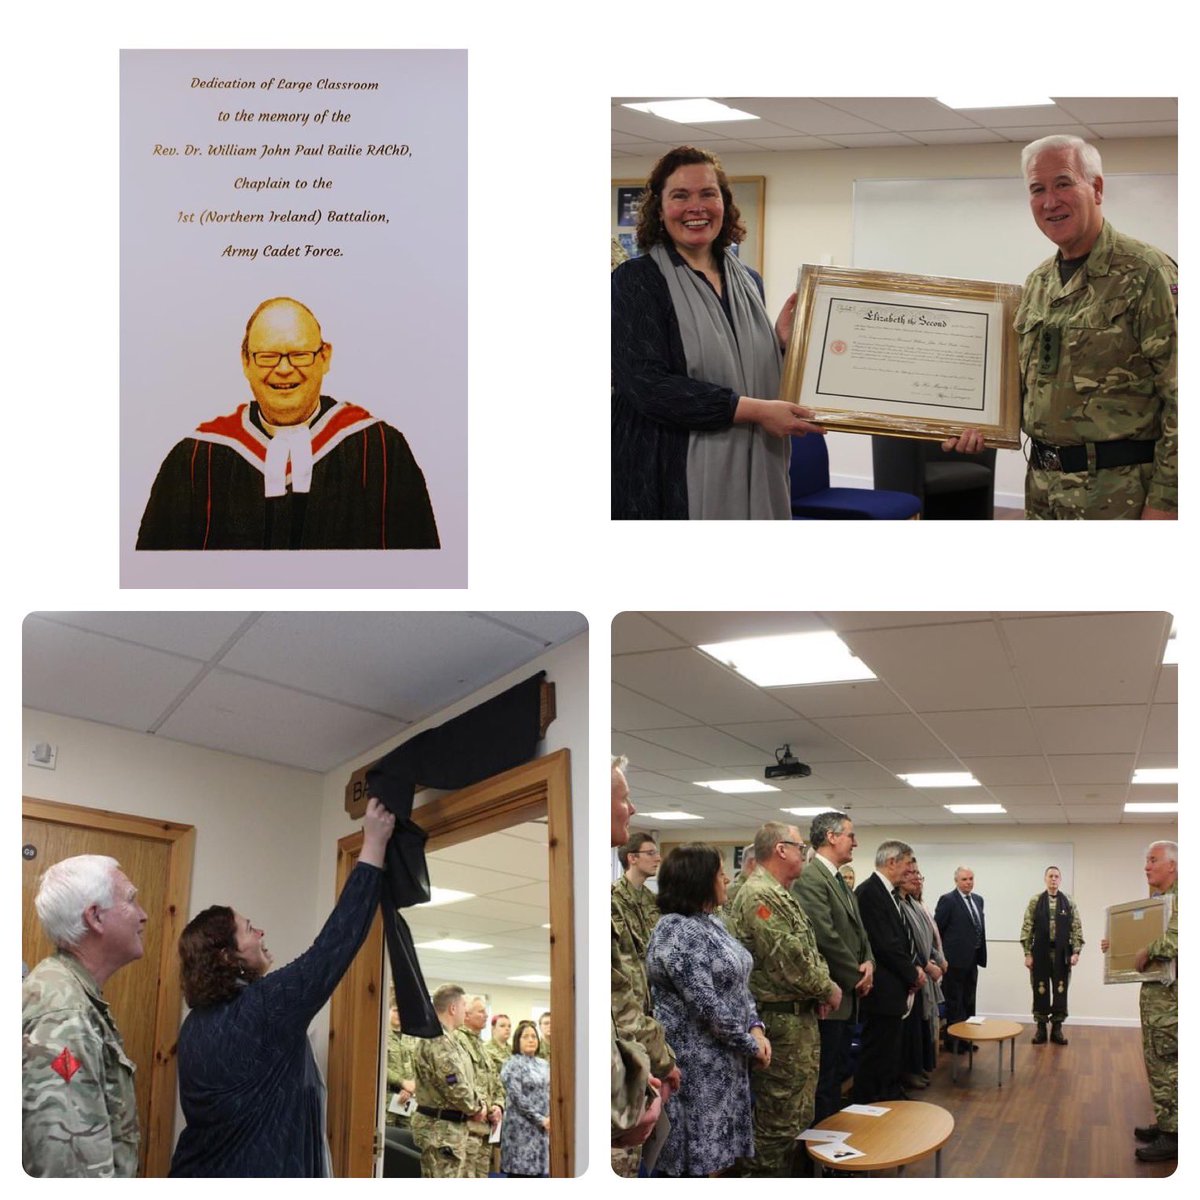 Following the untimely passing of Padre Paul Bailie, adult volunteers across the Bn came together to dedicate & name the large classroom Magilligan CTC in his memory with his widow, Mrs Anne Bailie. @ALieutenancy @RFCANI @ArmyCadetsUK @paul_bailie @DepComdt_1NI @DComdtEast1NI